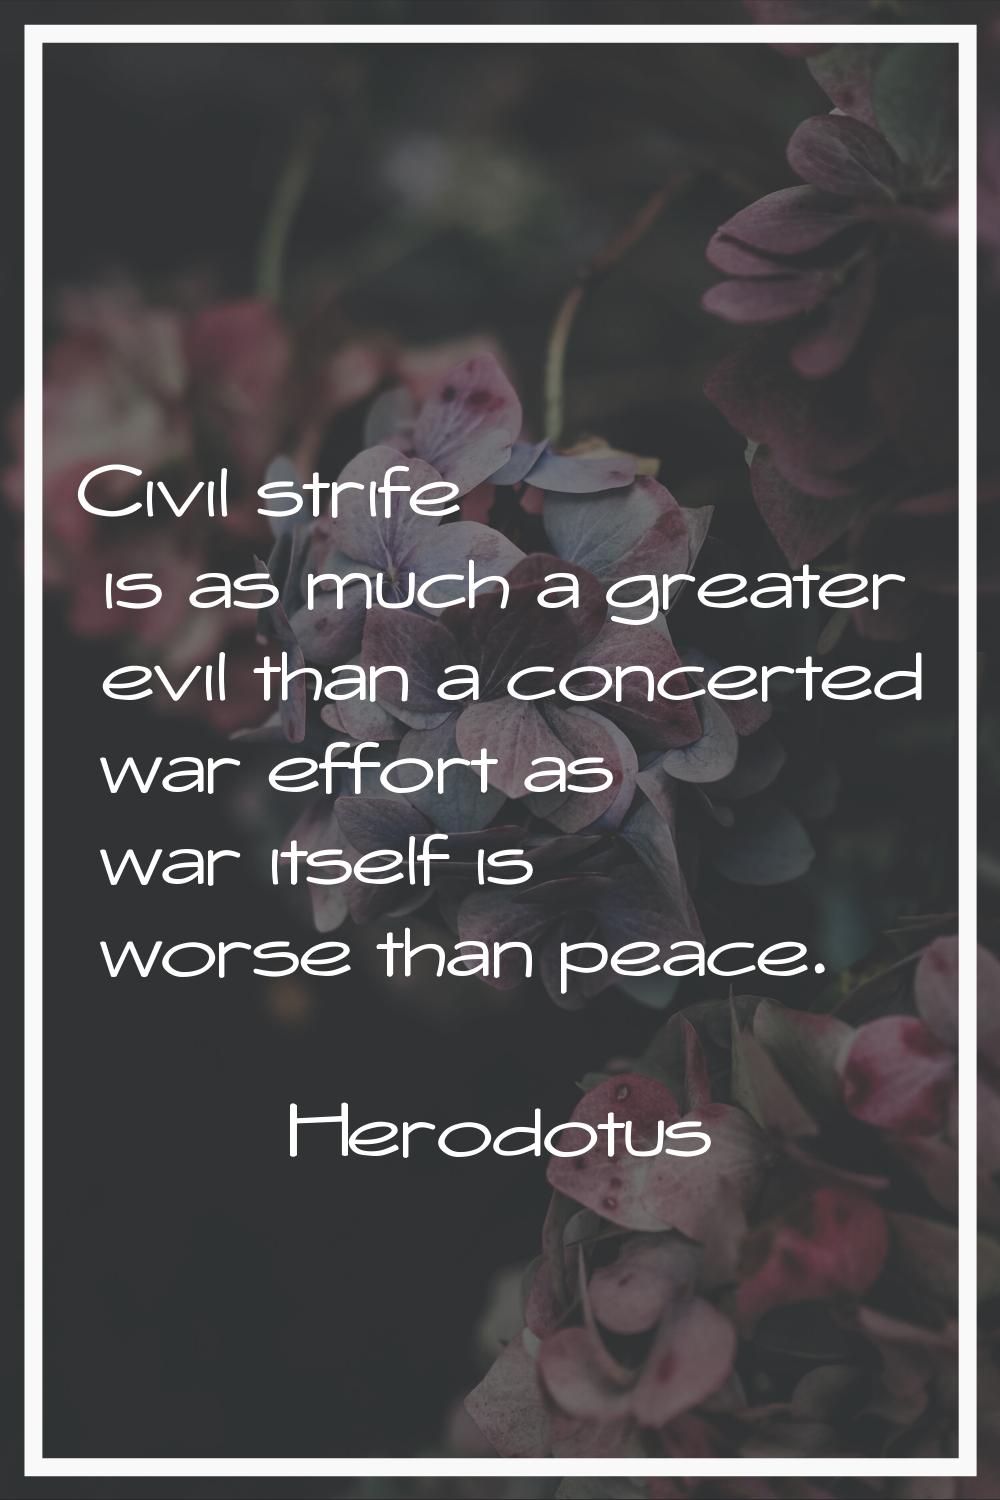 Civil strife is as much a greater evil than a concerted war effort as war itself is worse than peac